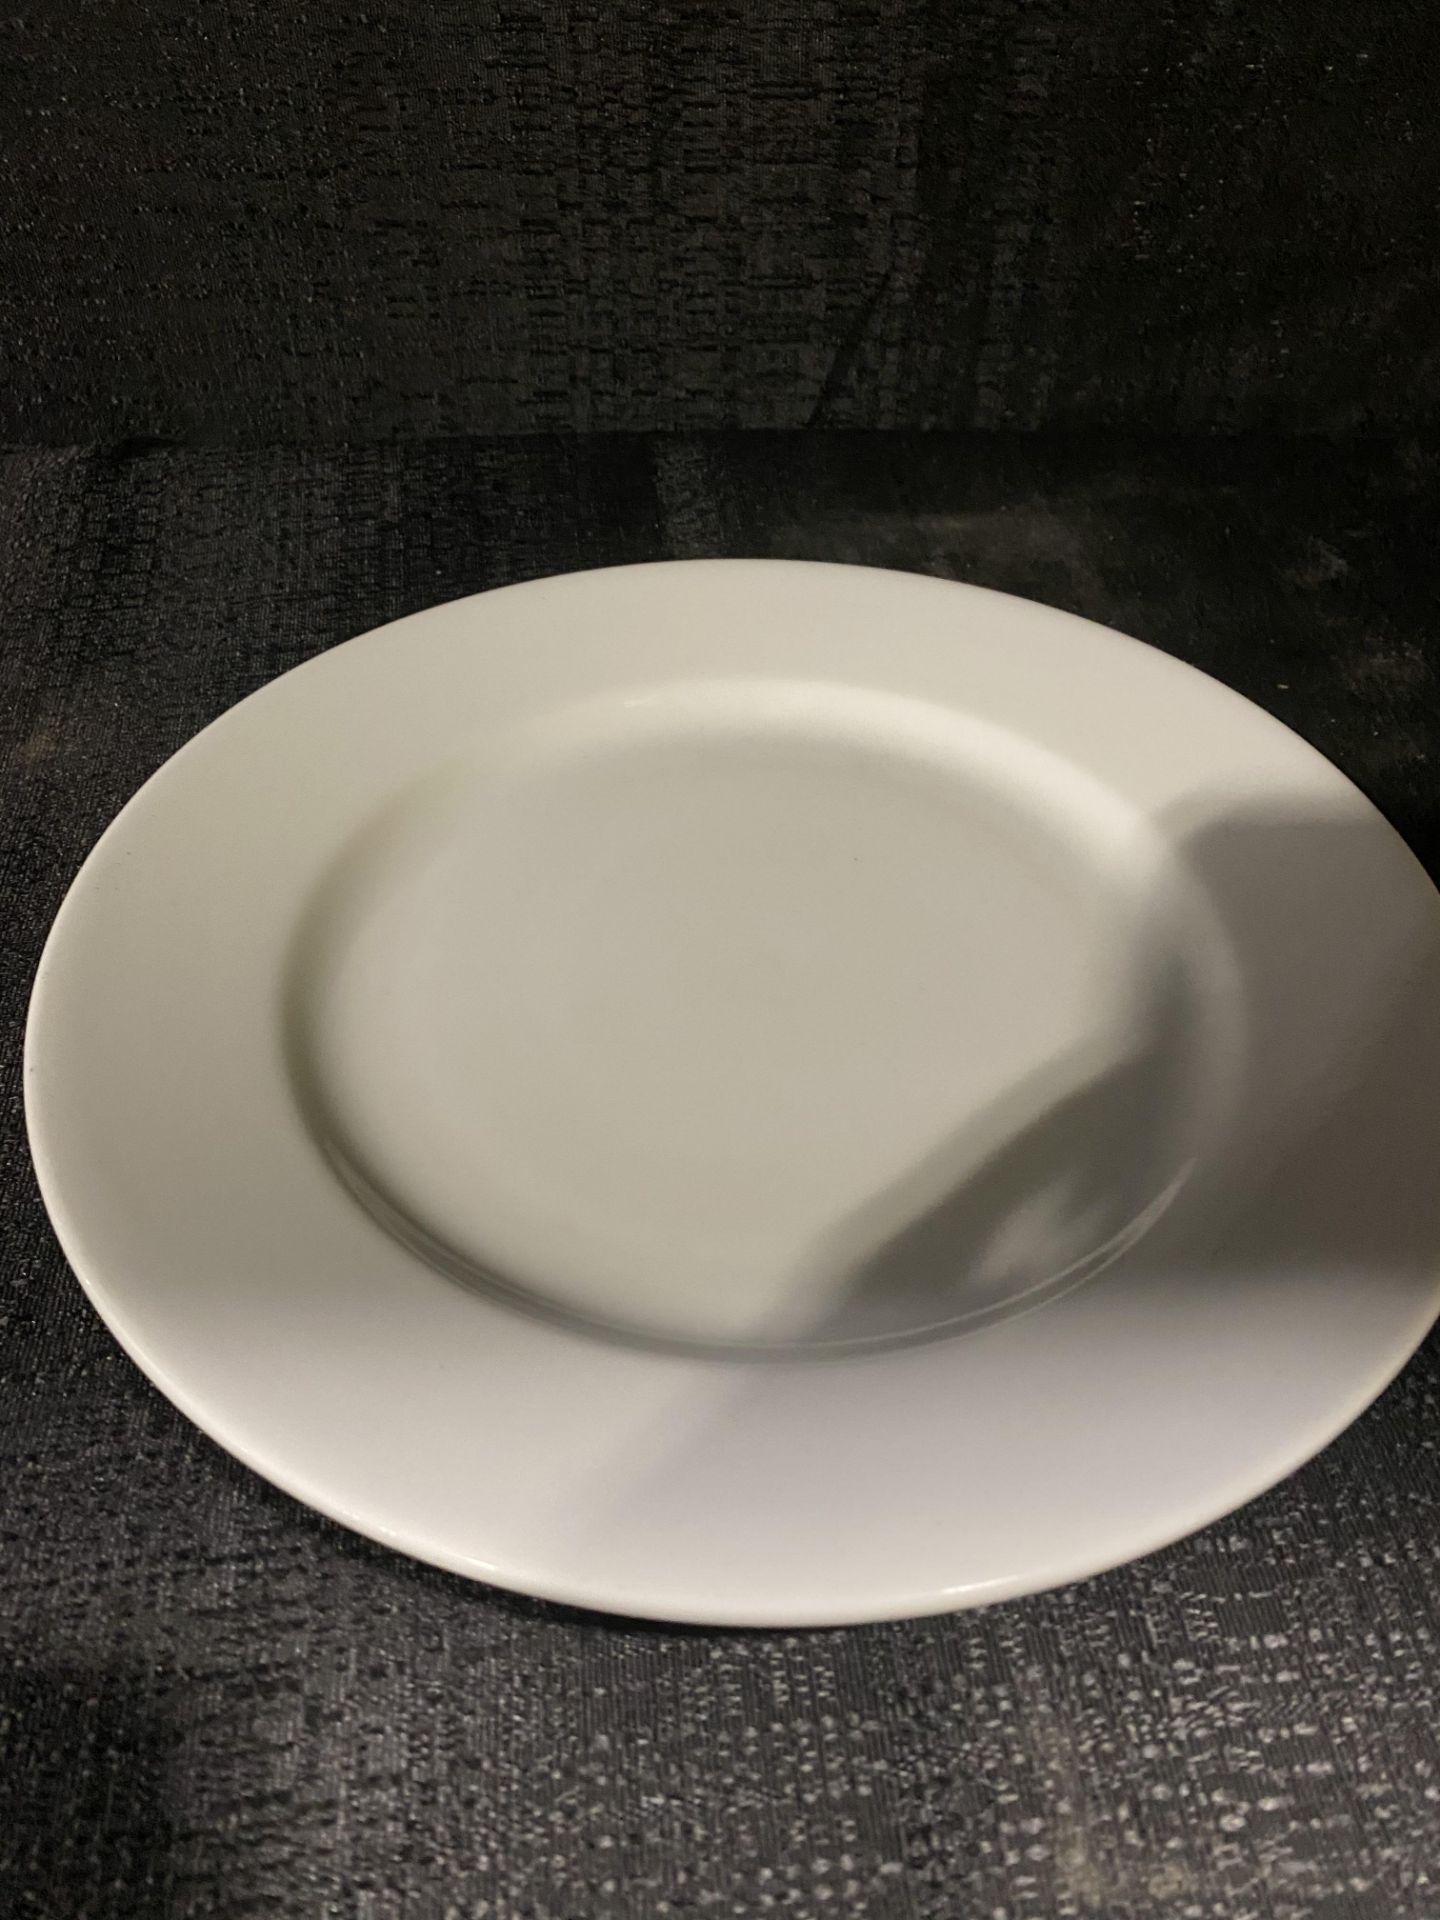 (300) 9.5" Salad/Dessert Plates White China Sant Andrea (BRING PACKING MATERIAL) - Image 2 of 3